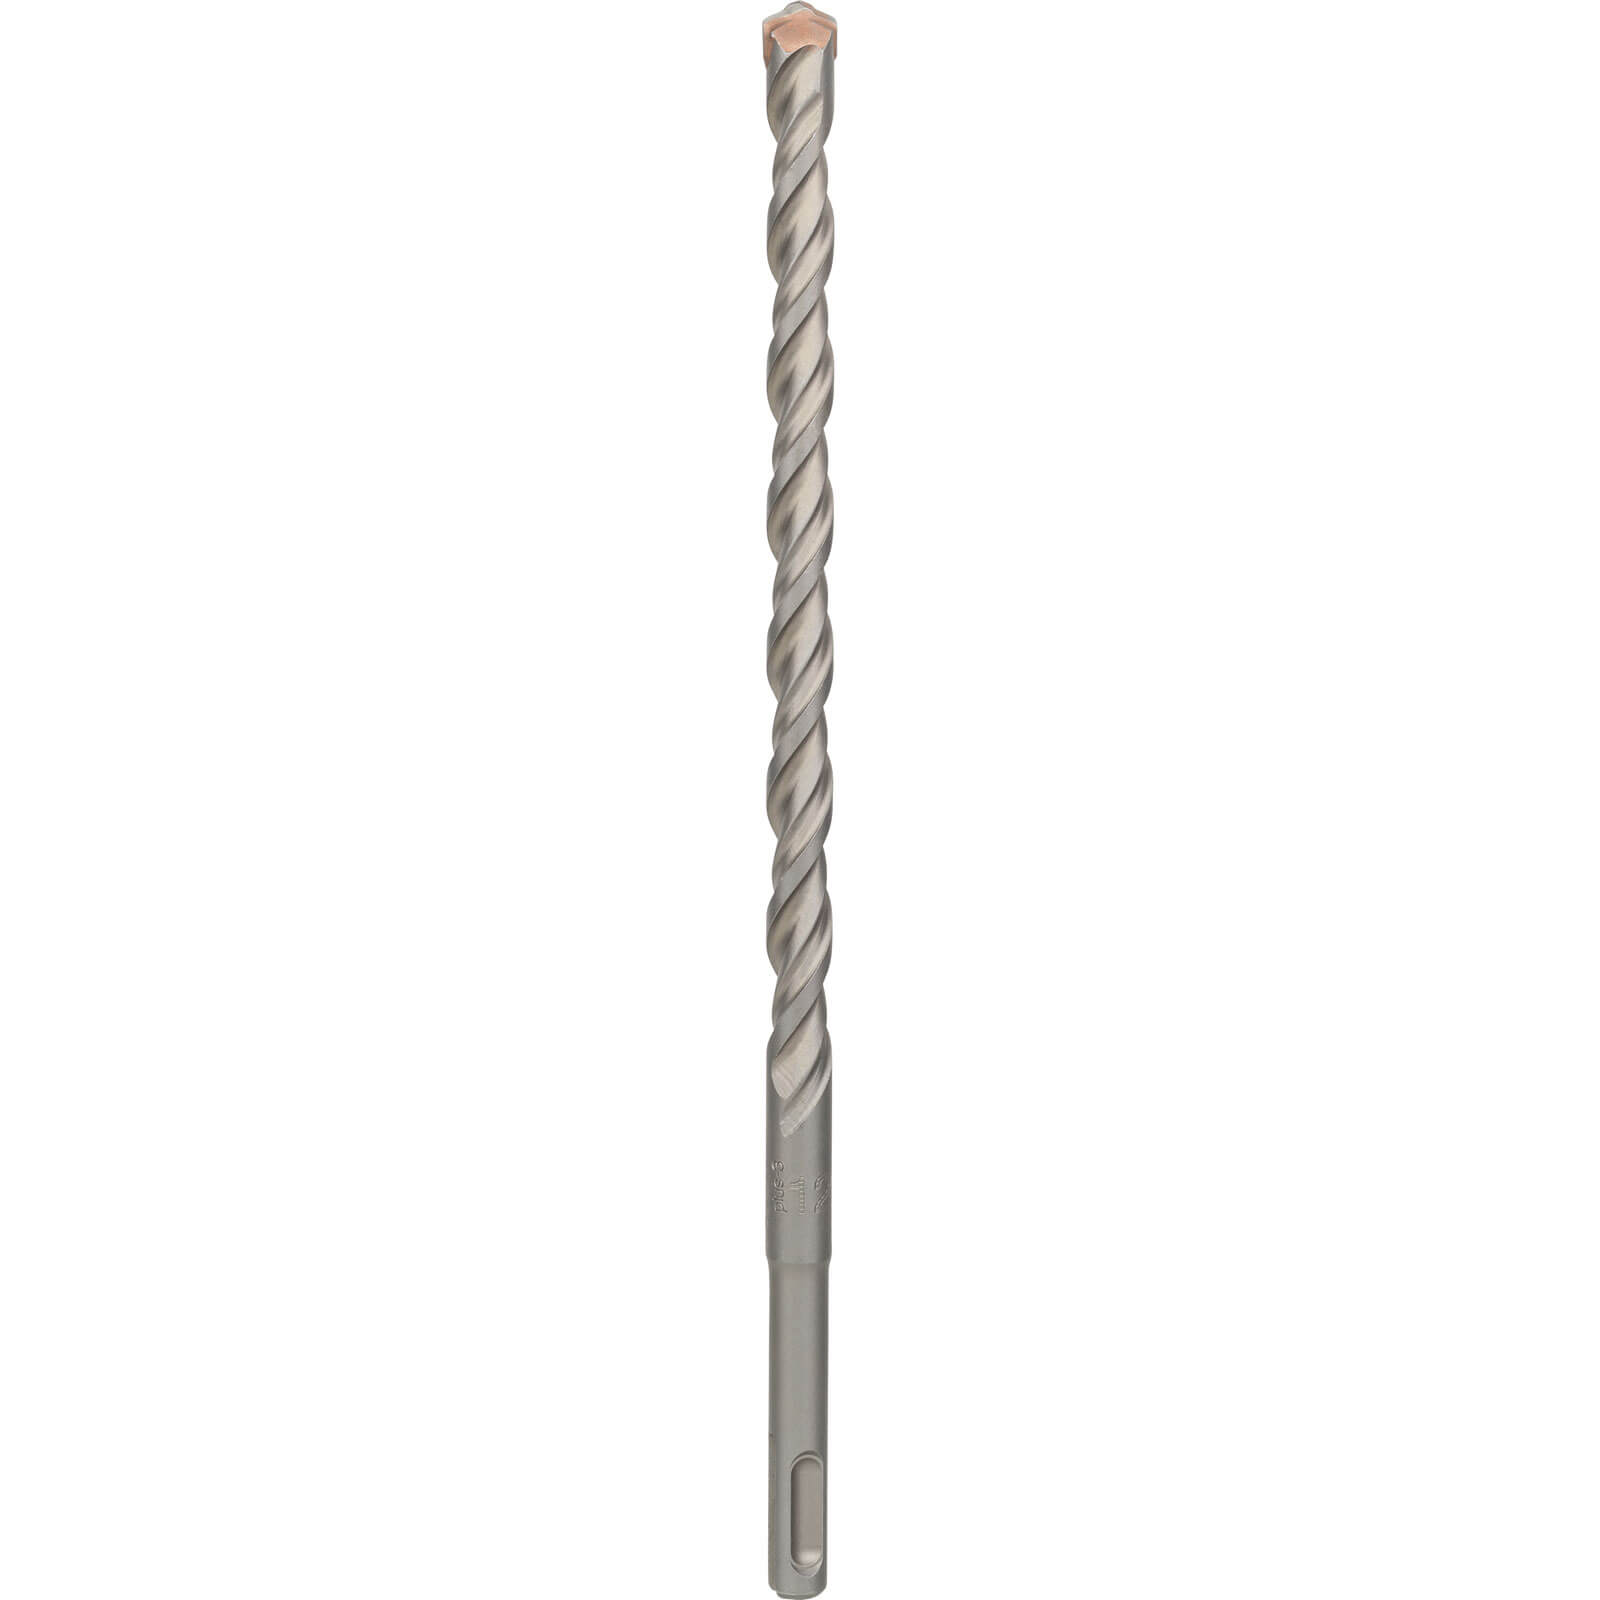 Image of Bosch Series 3 SDS Plus Masonry Drill Bit 12mm 260mm Pack of 1